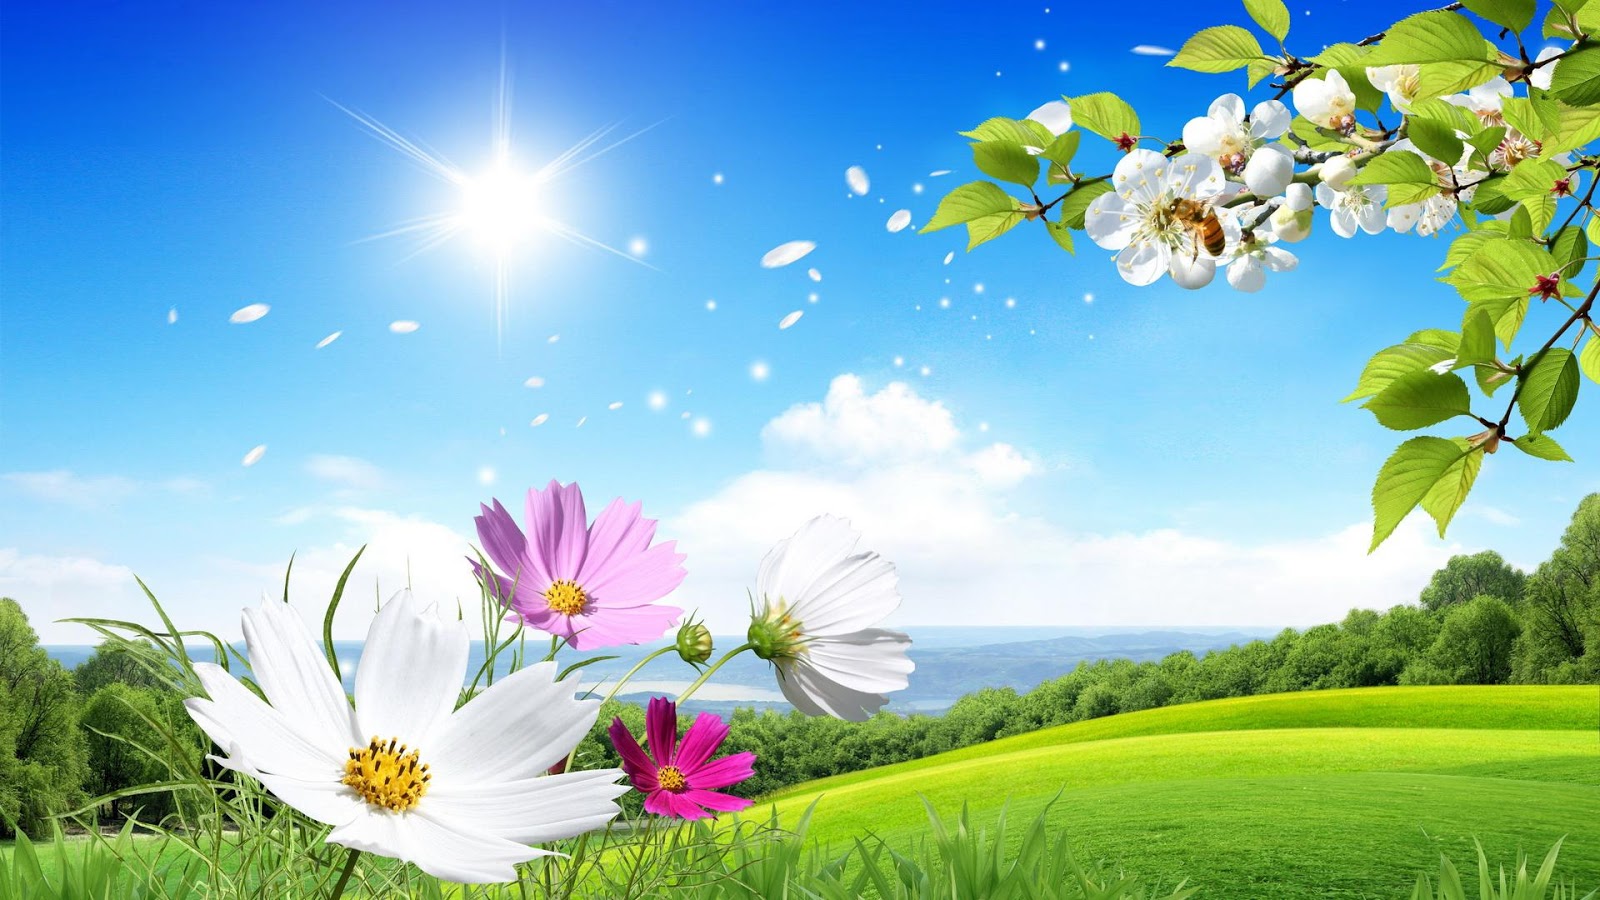 flowers for flower lovers Flowers wallpapers natural sceneries 1600x900